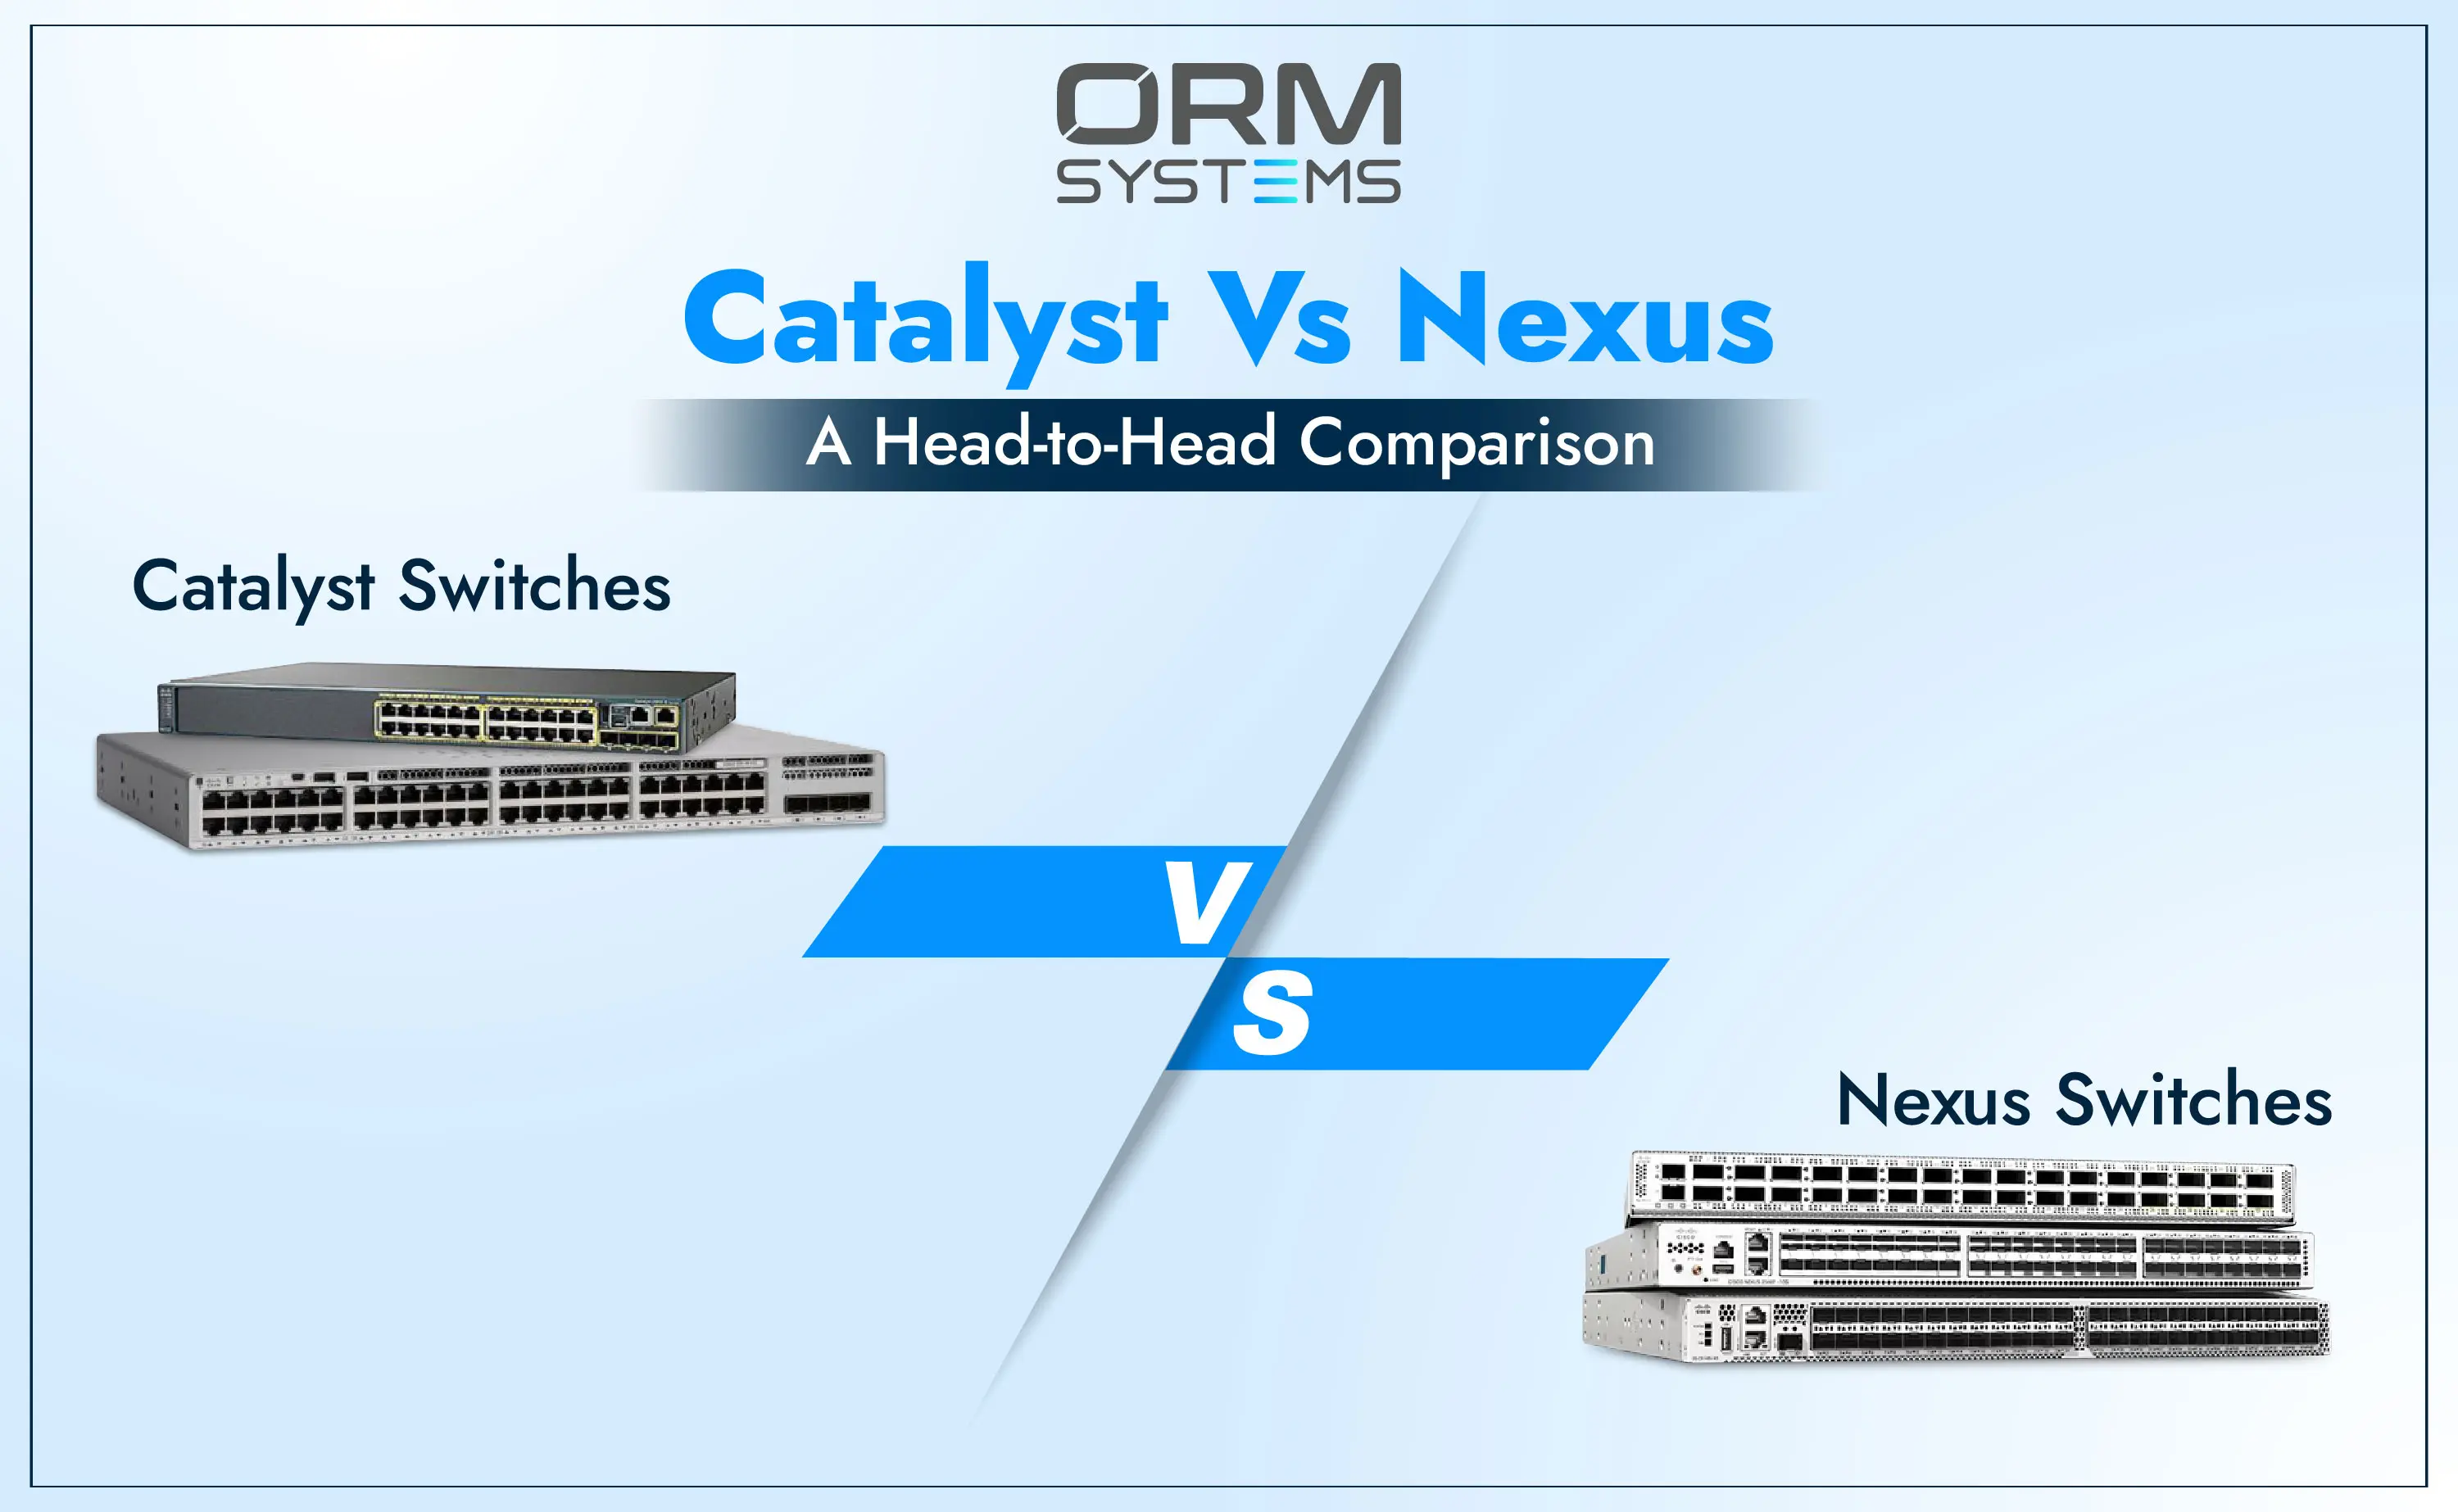 Cisco Nexus Vs Catalyst Switches: What’s the Difference?